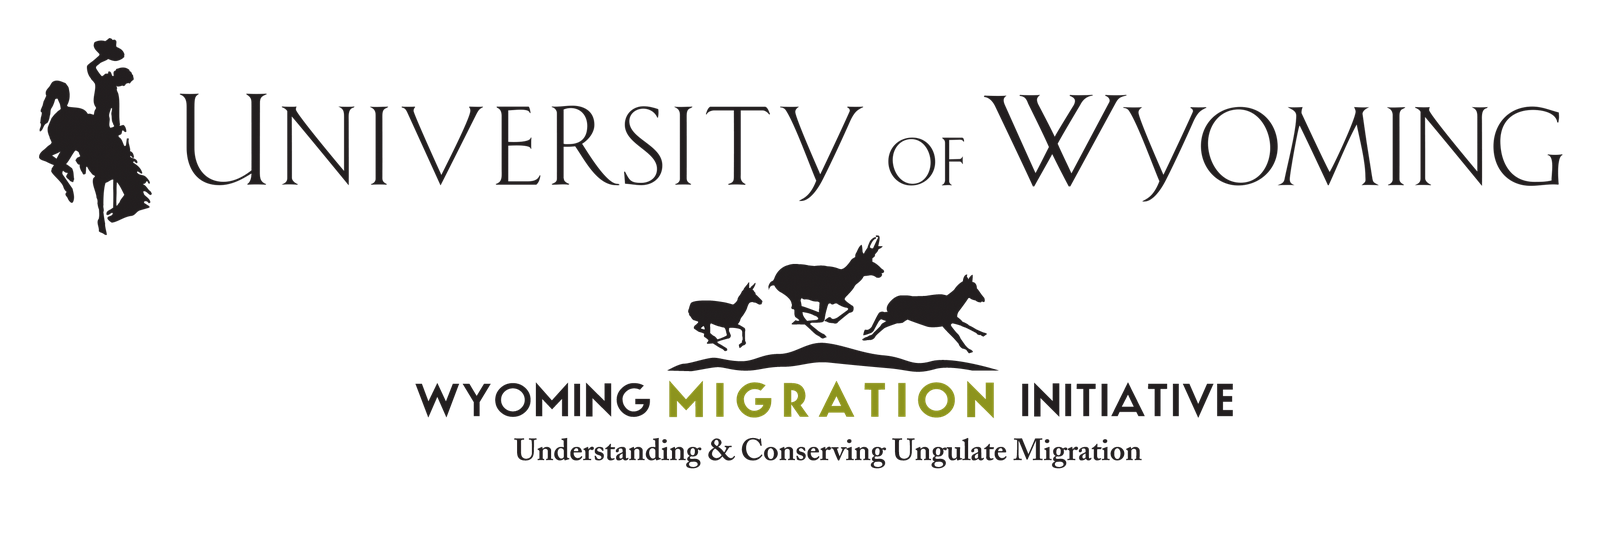 A logo with a cowboy on a bucking horse next to the words &quot;University of Wyoming&quot;. Below, a smaller logo says &quot;Wyoming Migration Initiative&quot; with an illustration of three pronhorn antelope running.